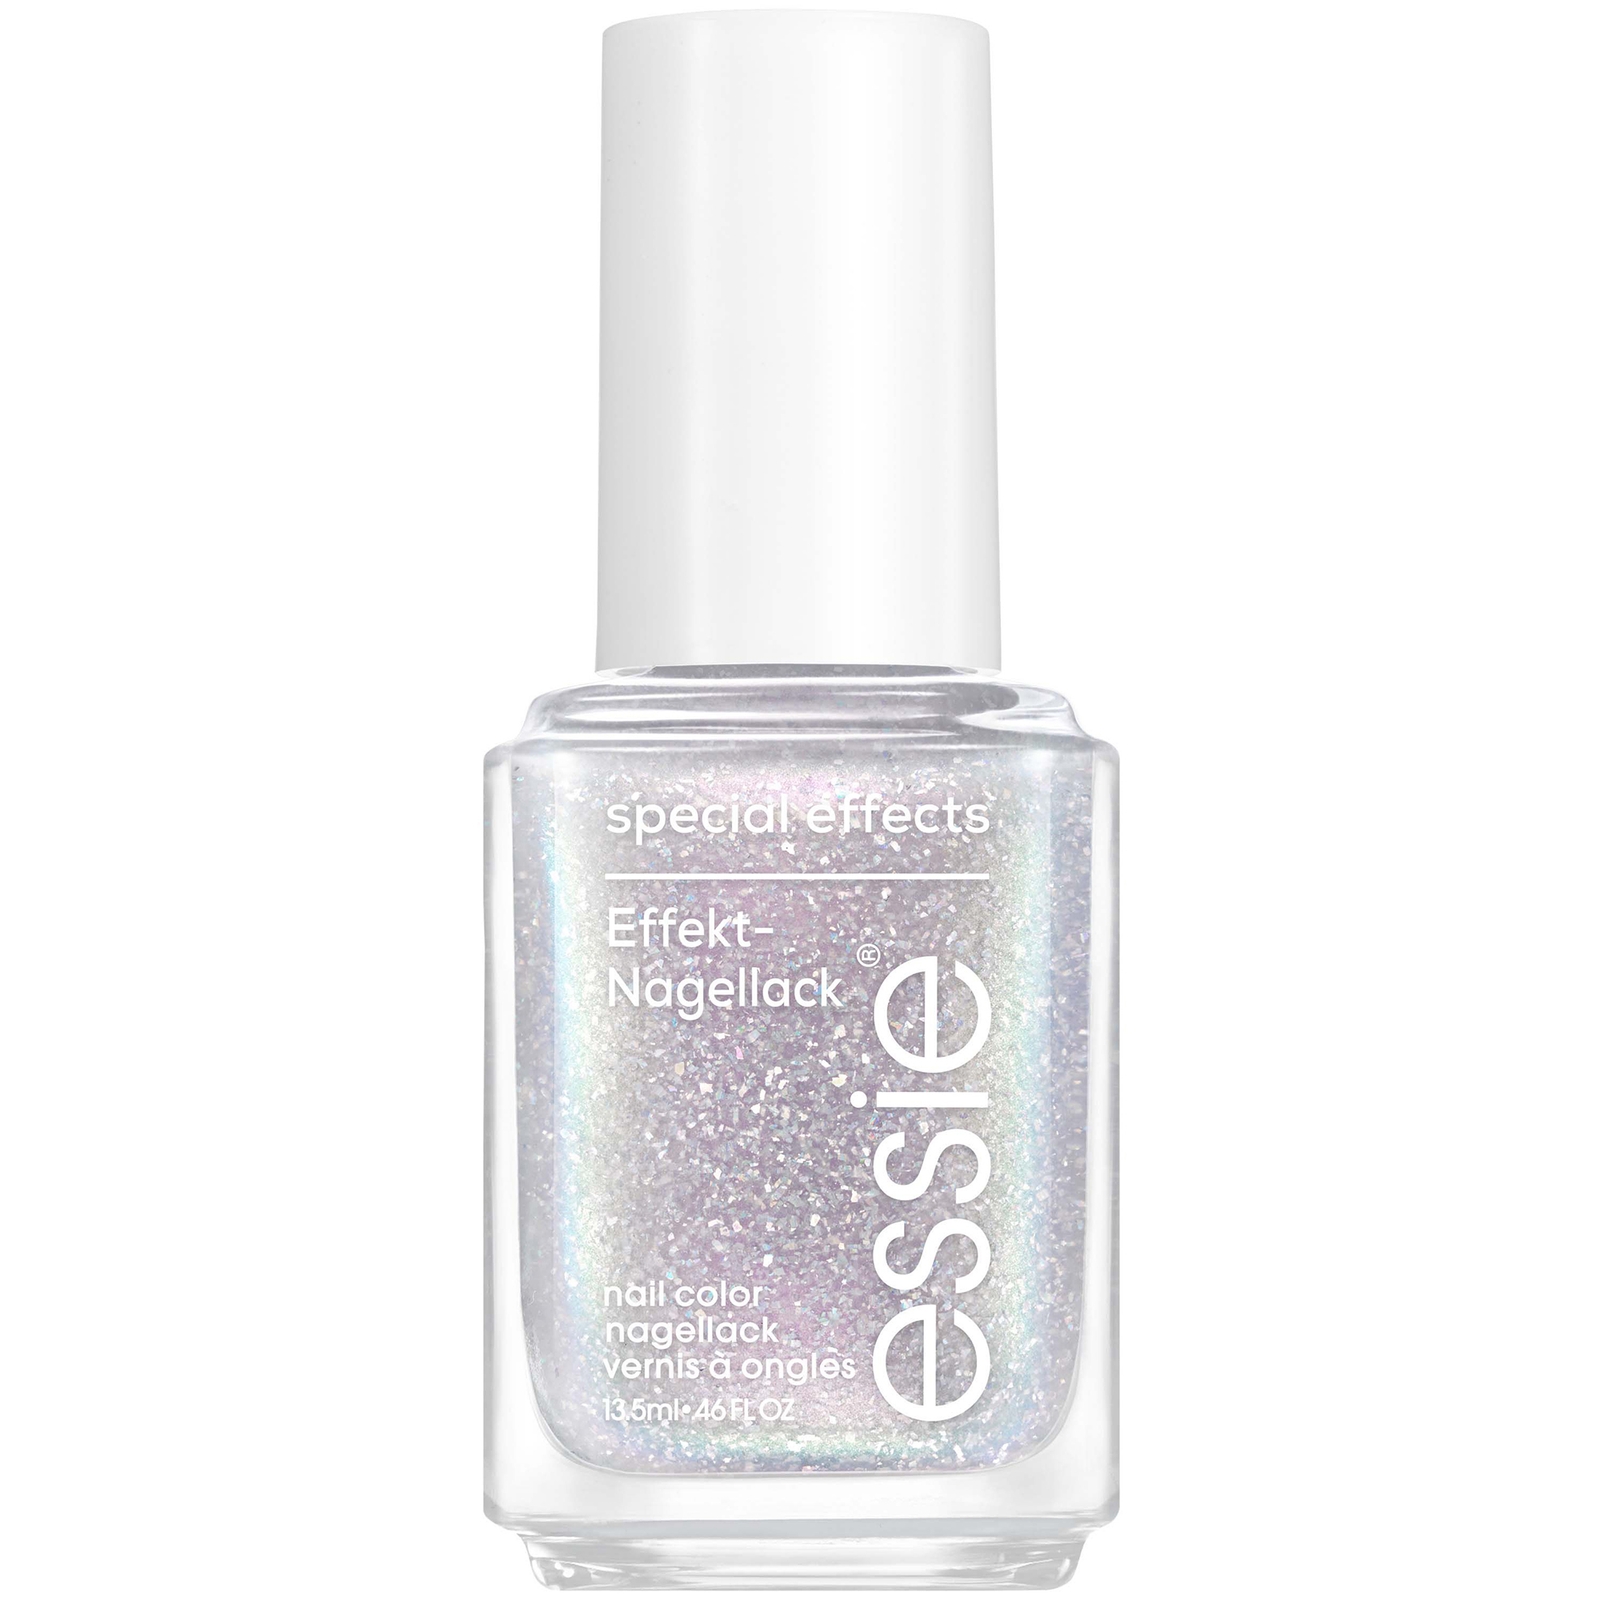 Essie Original Nail Art Studio Special Effects Nail Polish Topcoat 13.5ml (various Shades) - Lustrous Luxu In Lustrous Luxury